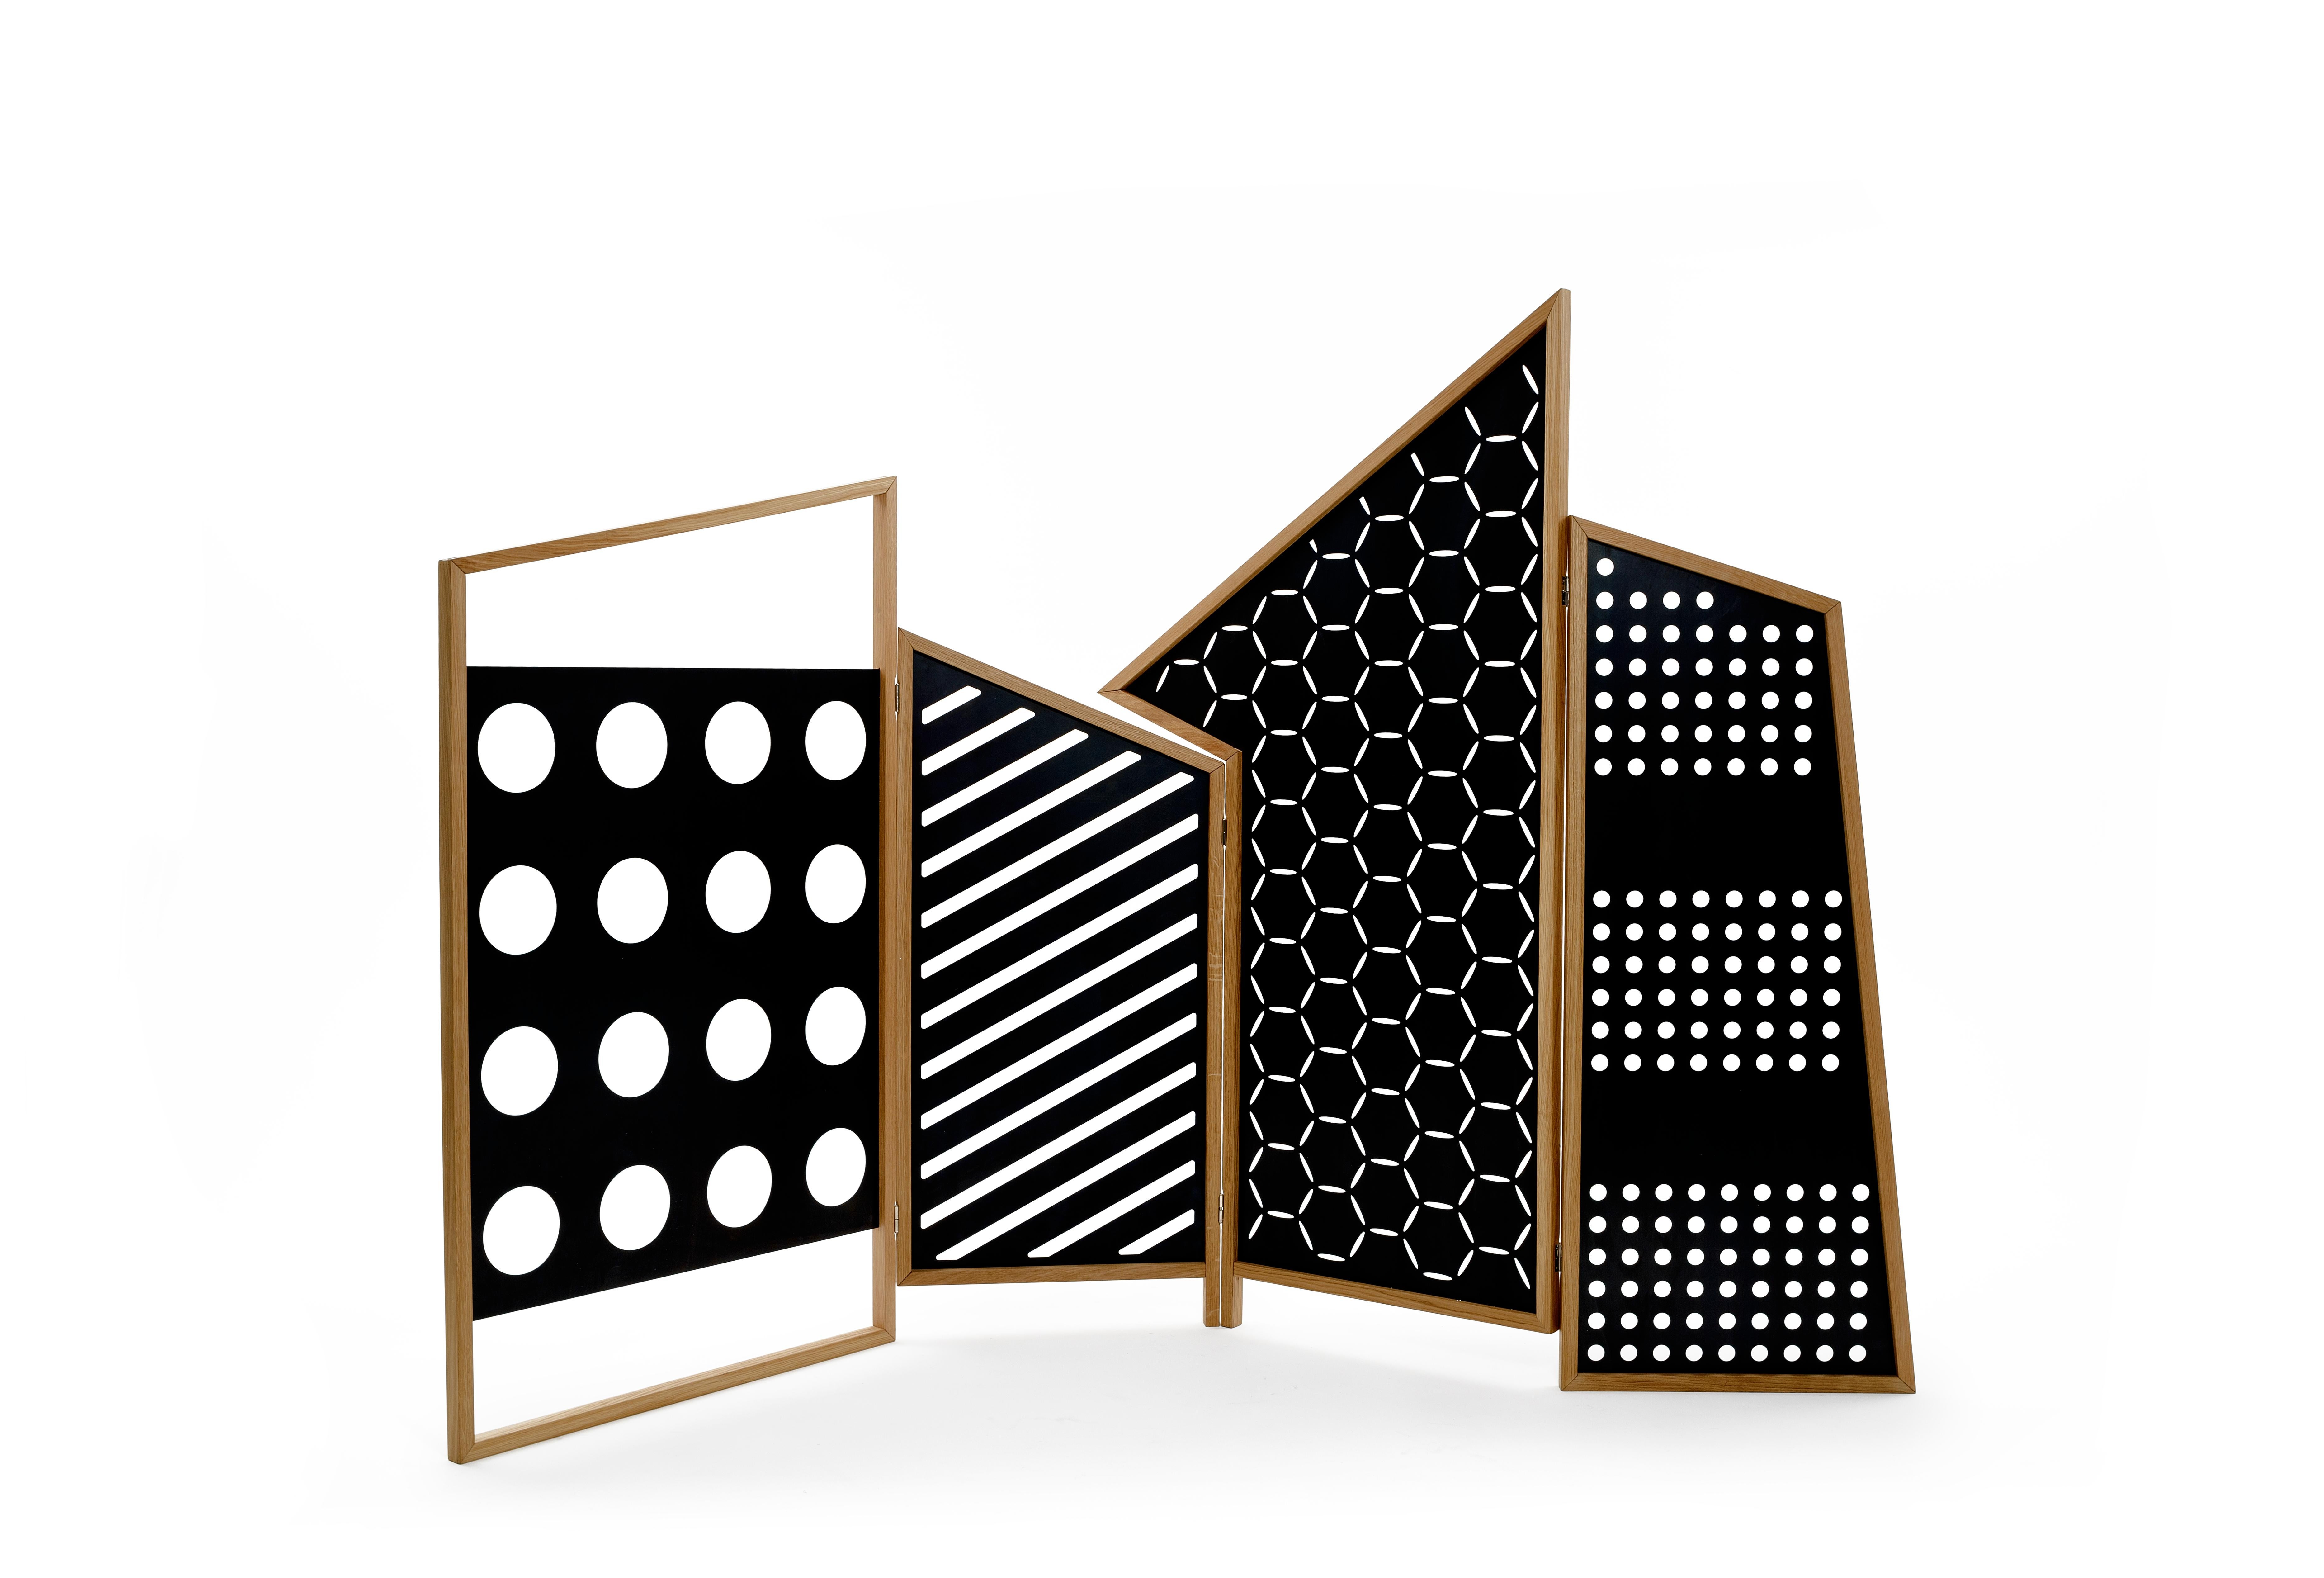 Opto Folding Screen Black Lacquered by Colé Italia with Lorenz + Kaz
Dimensions: H 200, W 300, D 4 cm
Materials: Laser-cut metal panels inside the frame, black anthracite or lacquered in four bright colors orange, green, rose, pale